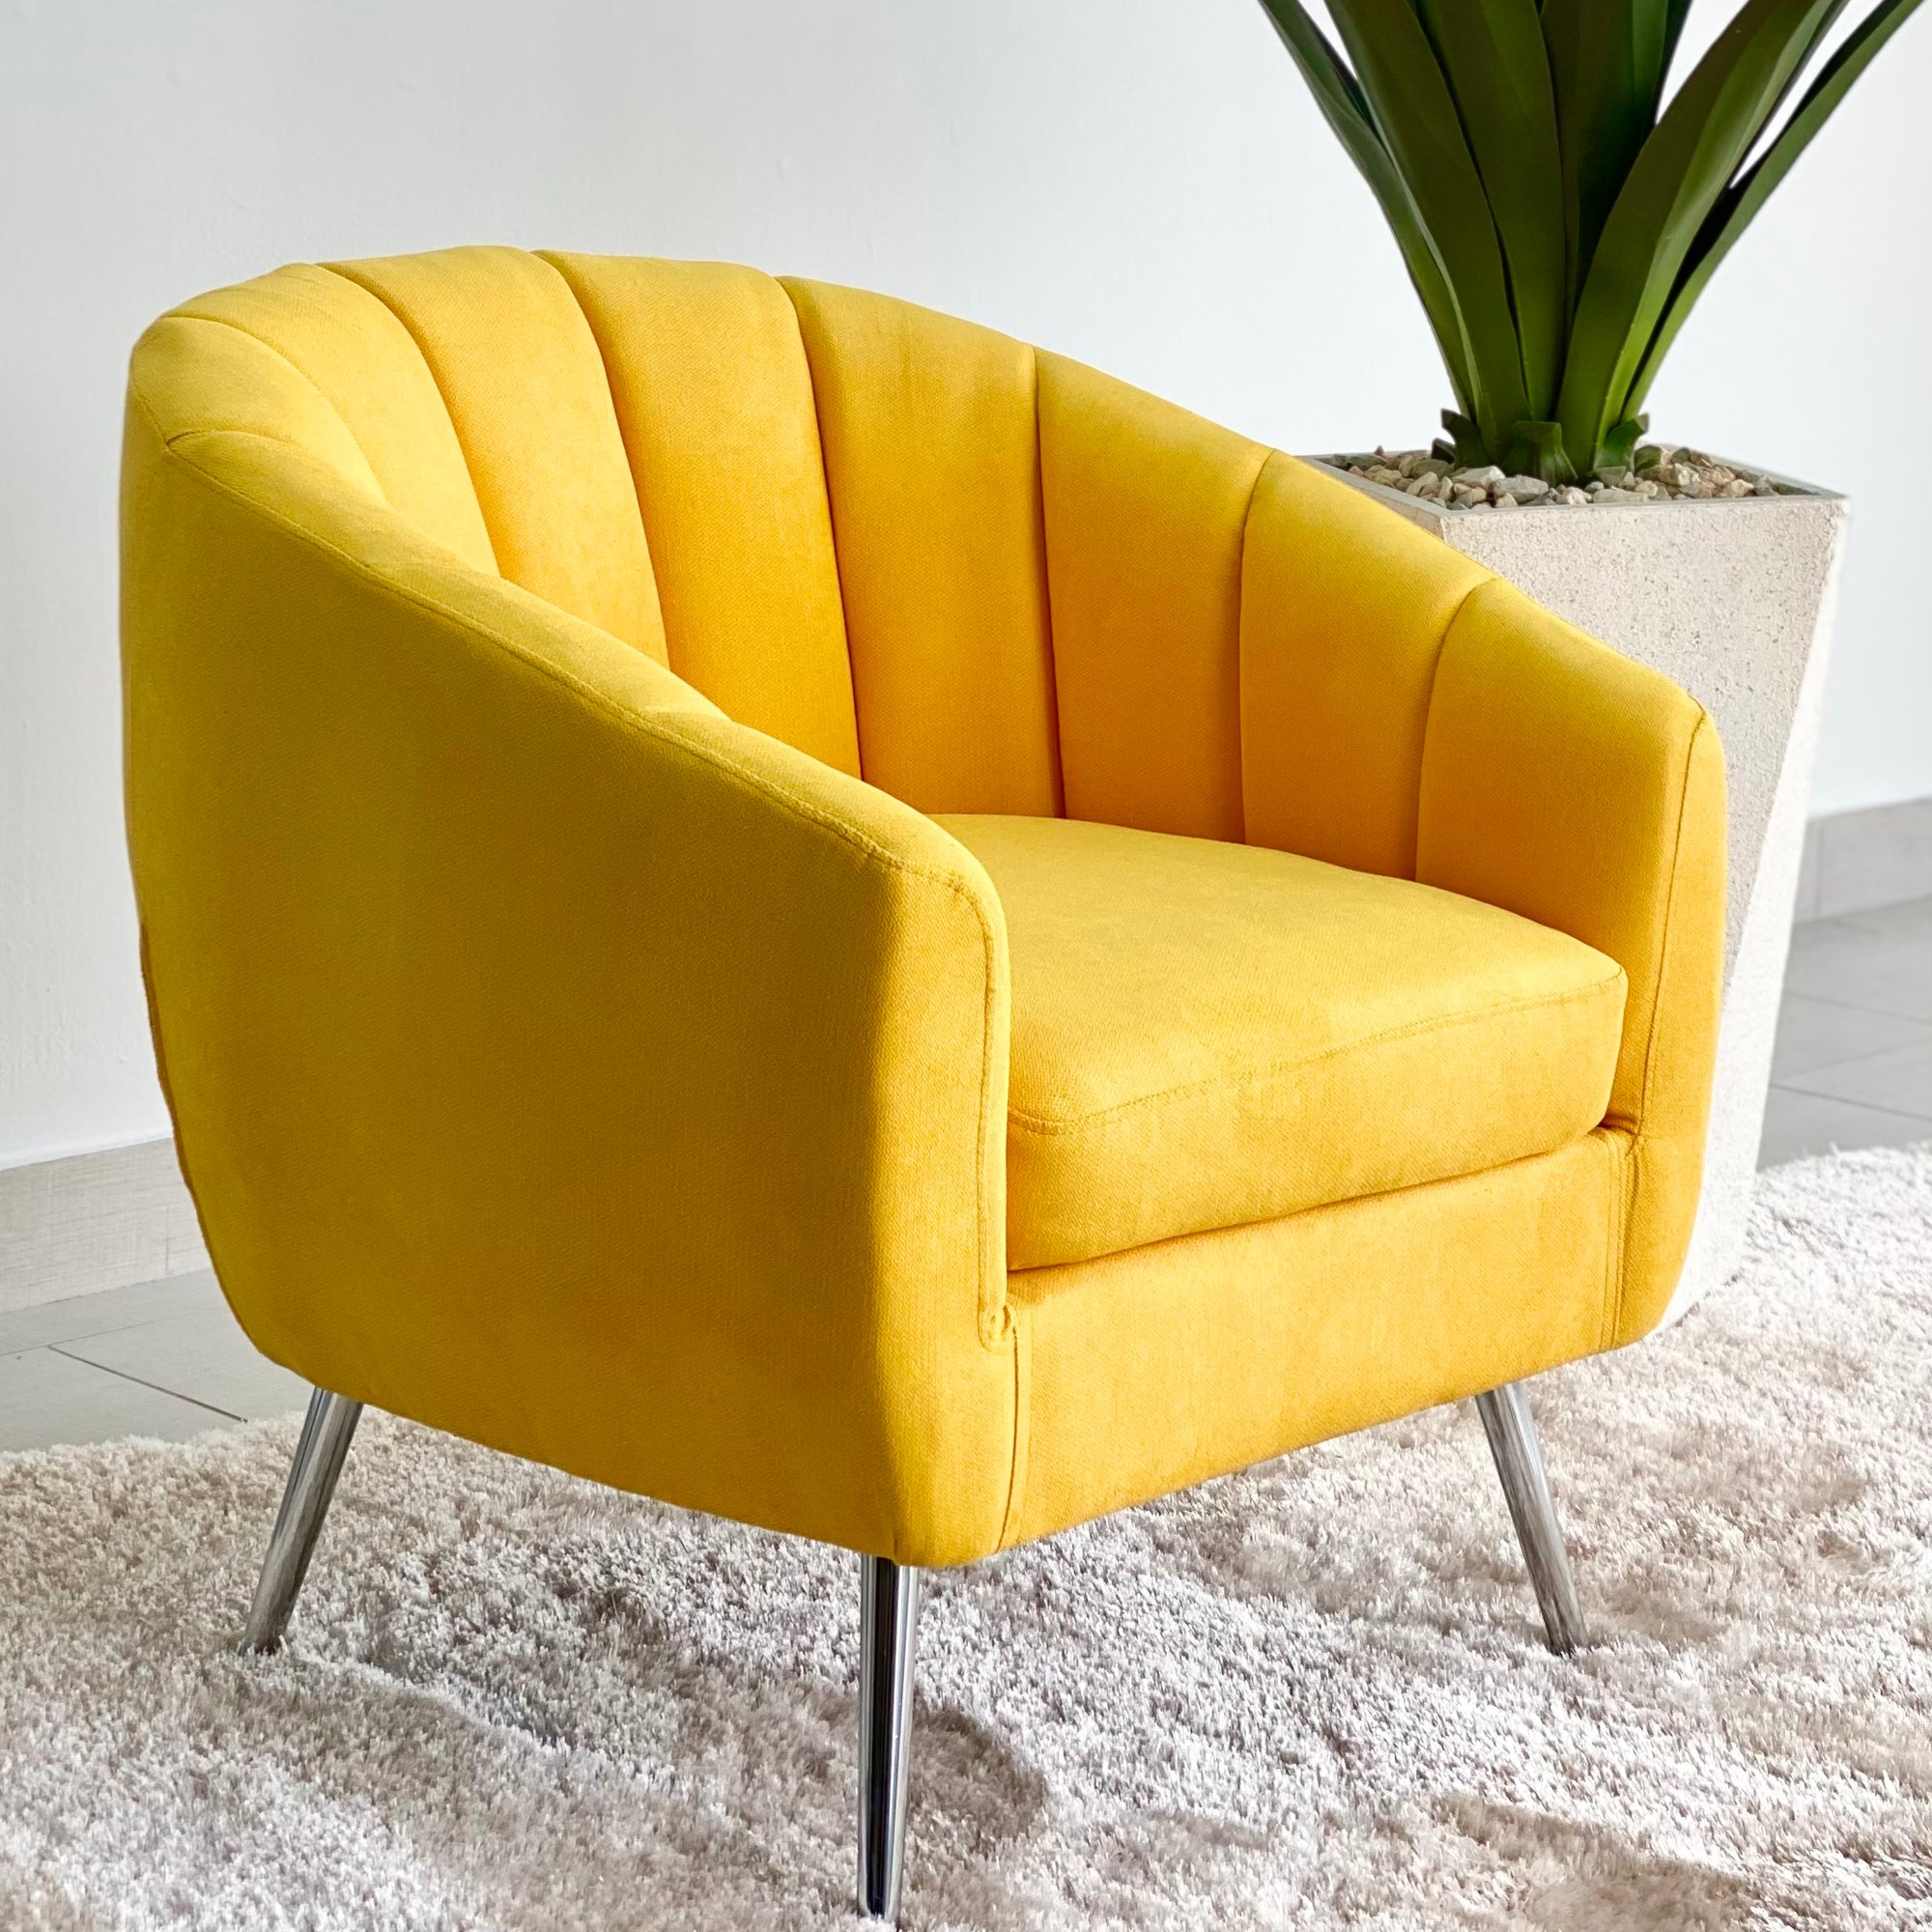 Arch Yellow Fabric Chair Silver Legs